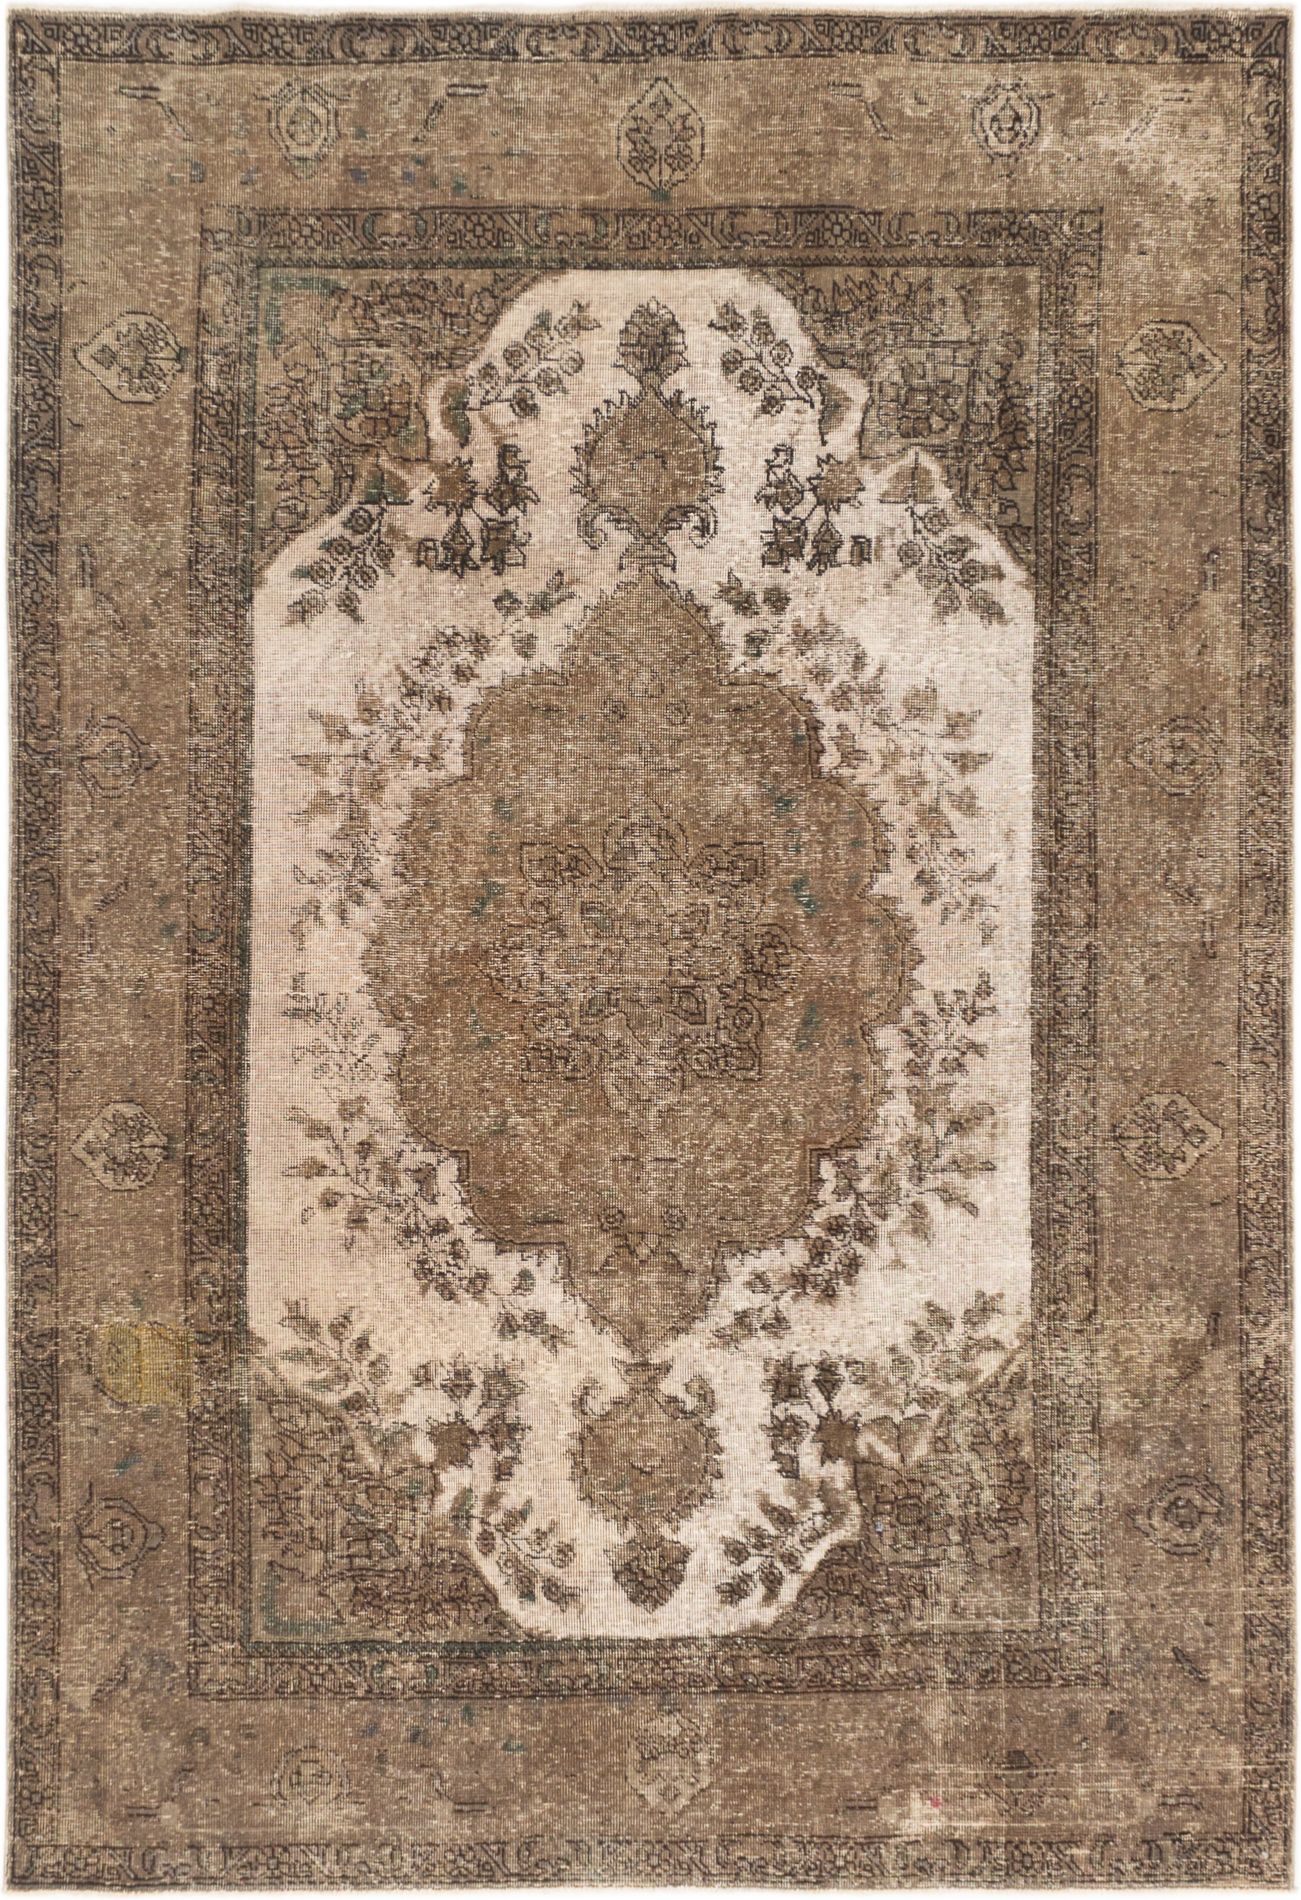 Hand-knotted Color Transition Khaki Wool Rug 6'6" x 9'6" Size: 6'6" x 9'6"  